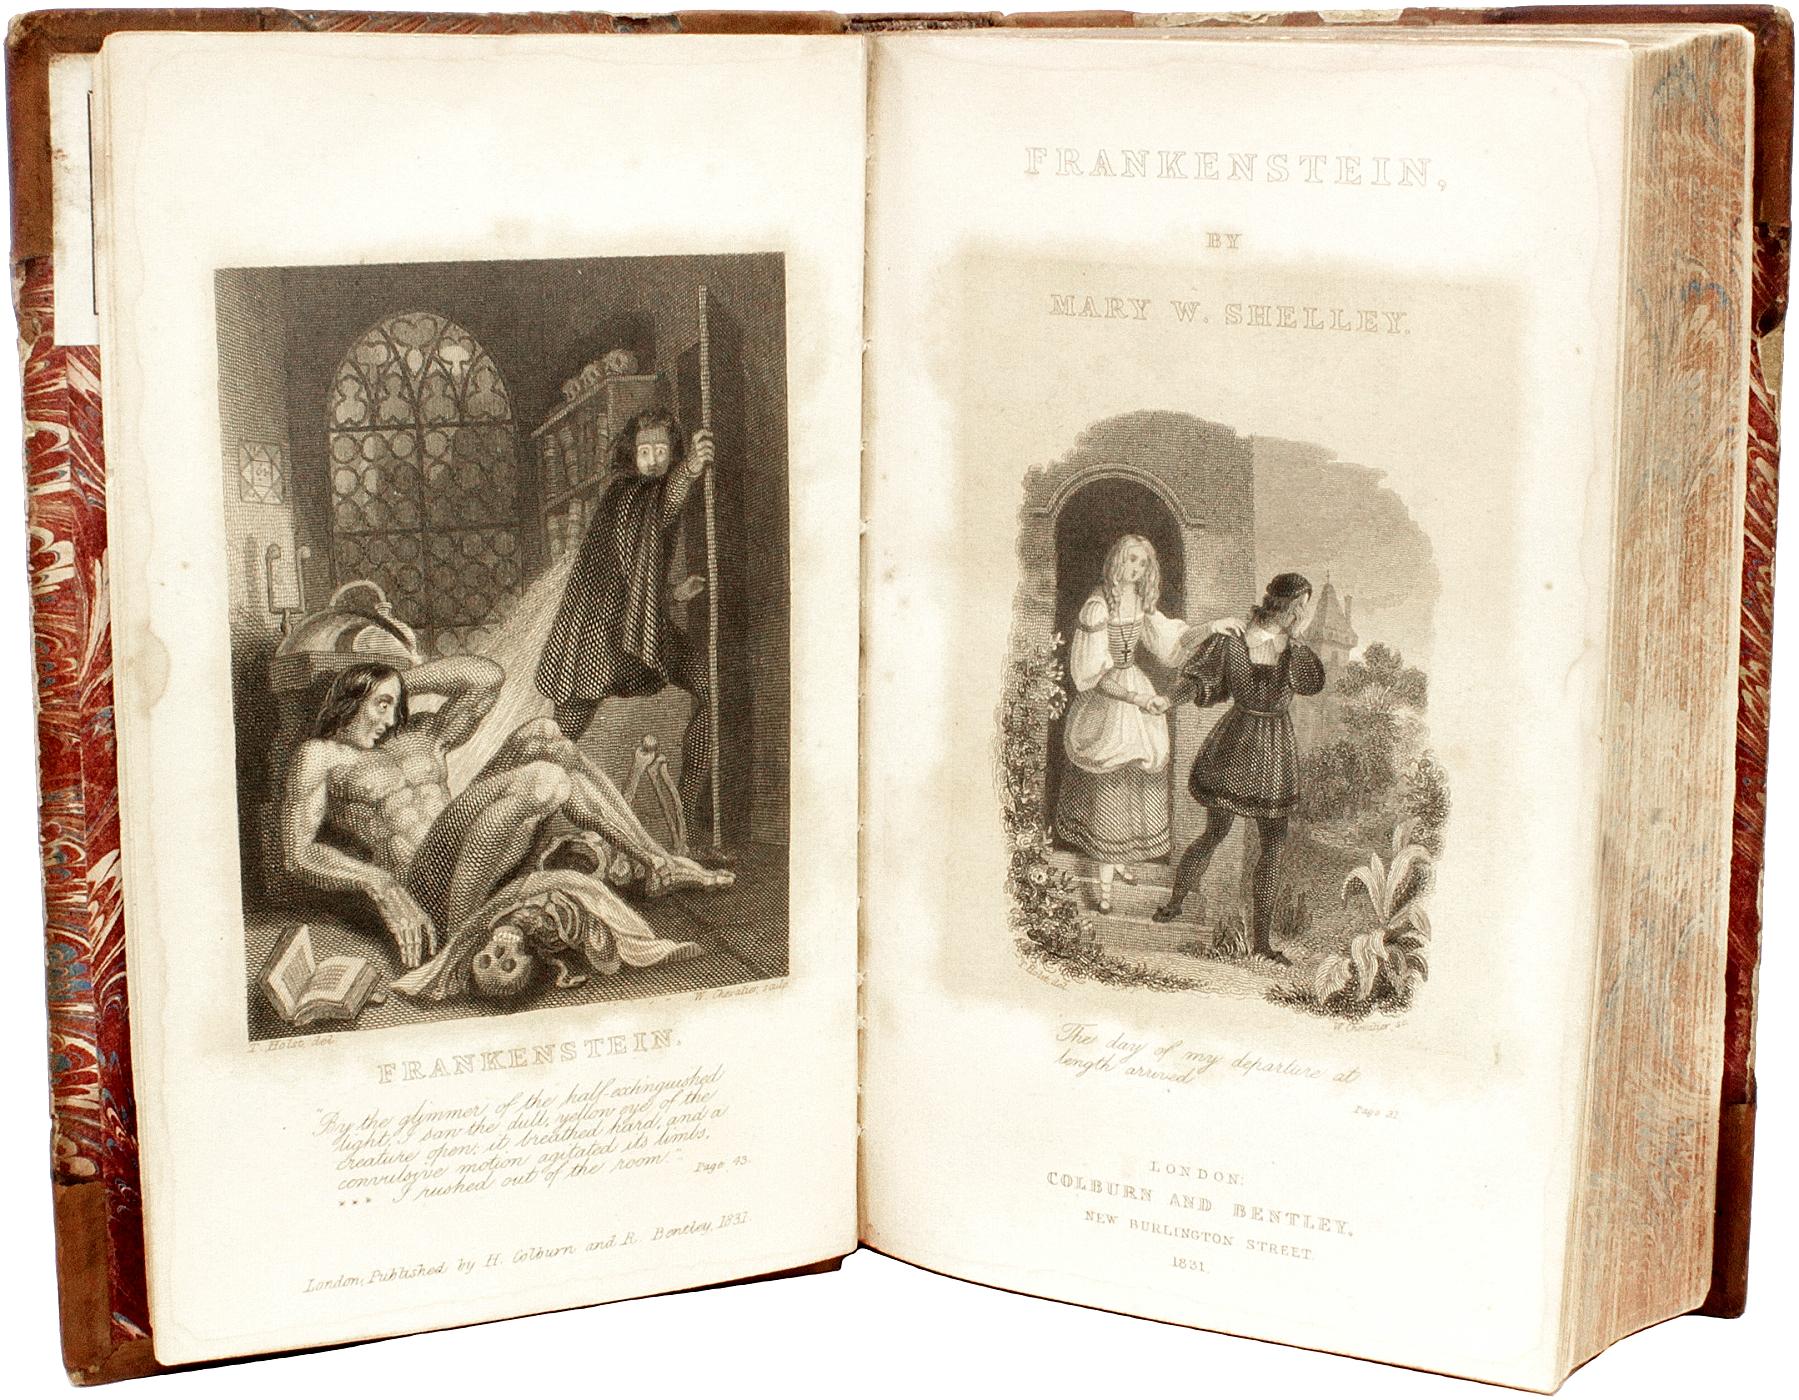 AUTHOR: SHELLEY, Mary. 

TITLE: Frankenstein; or, the Modern Prometheus, Revised, Corrected, and Illustrated with a New Introduction by the Author - BOUND WITH - Edgar Huntly: Or, The Sleep Walker. Volume IX of Bentley's Standard Novels